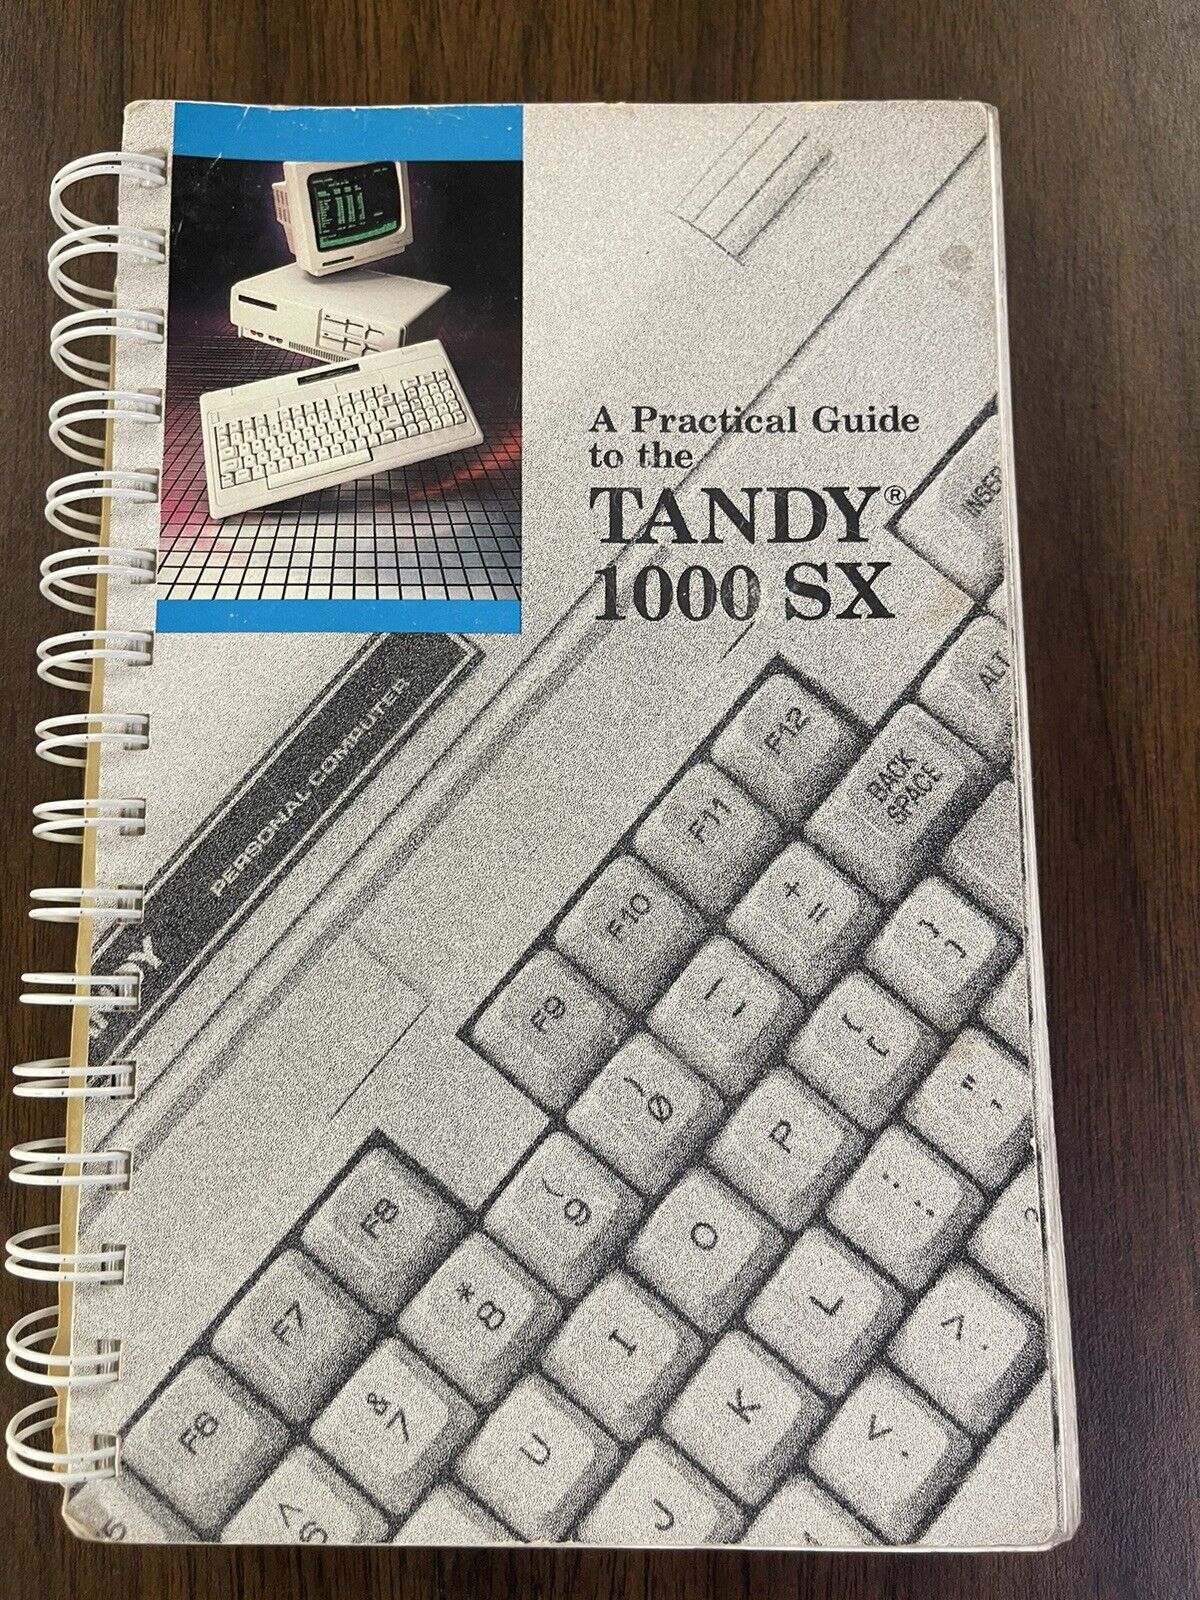 Vintage Radio Shack A Practical Guide to the Tandy 1000SX